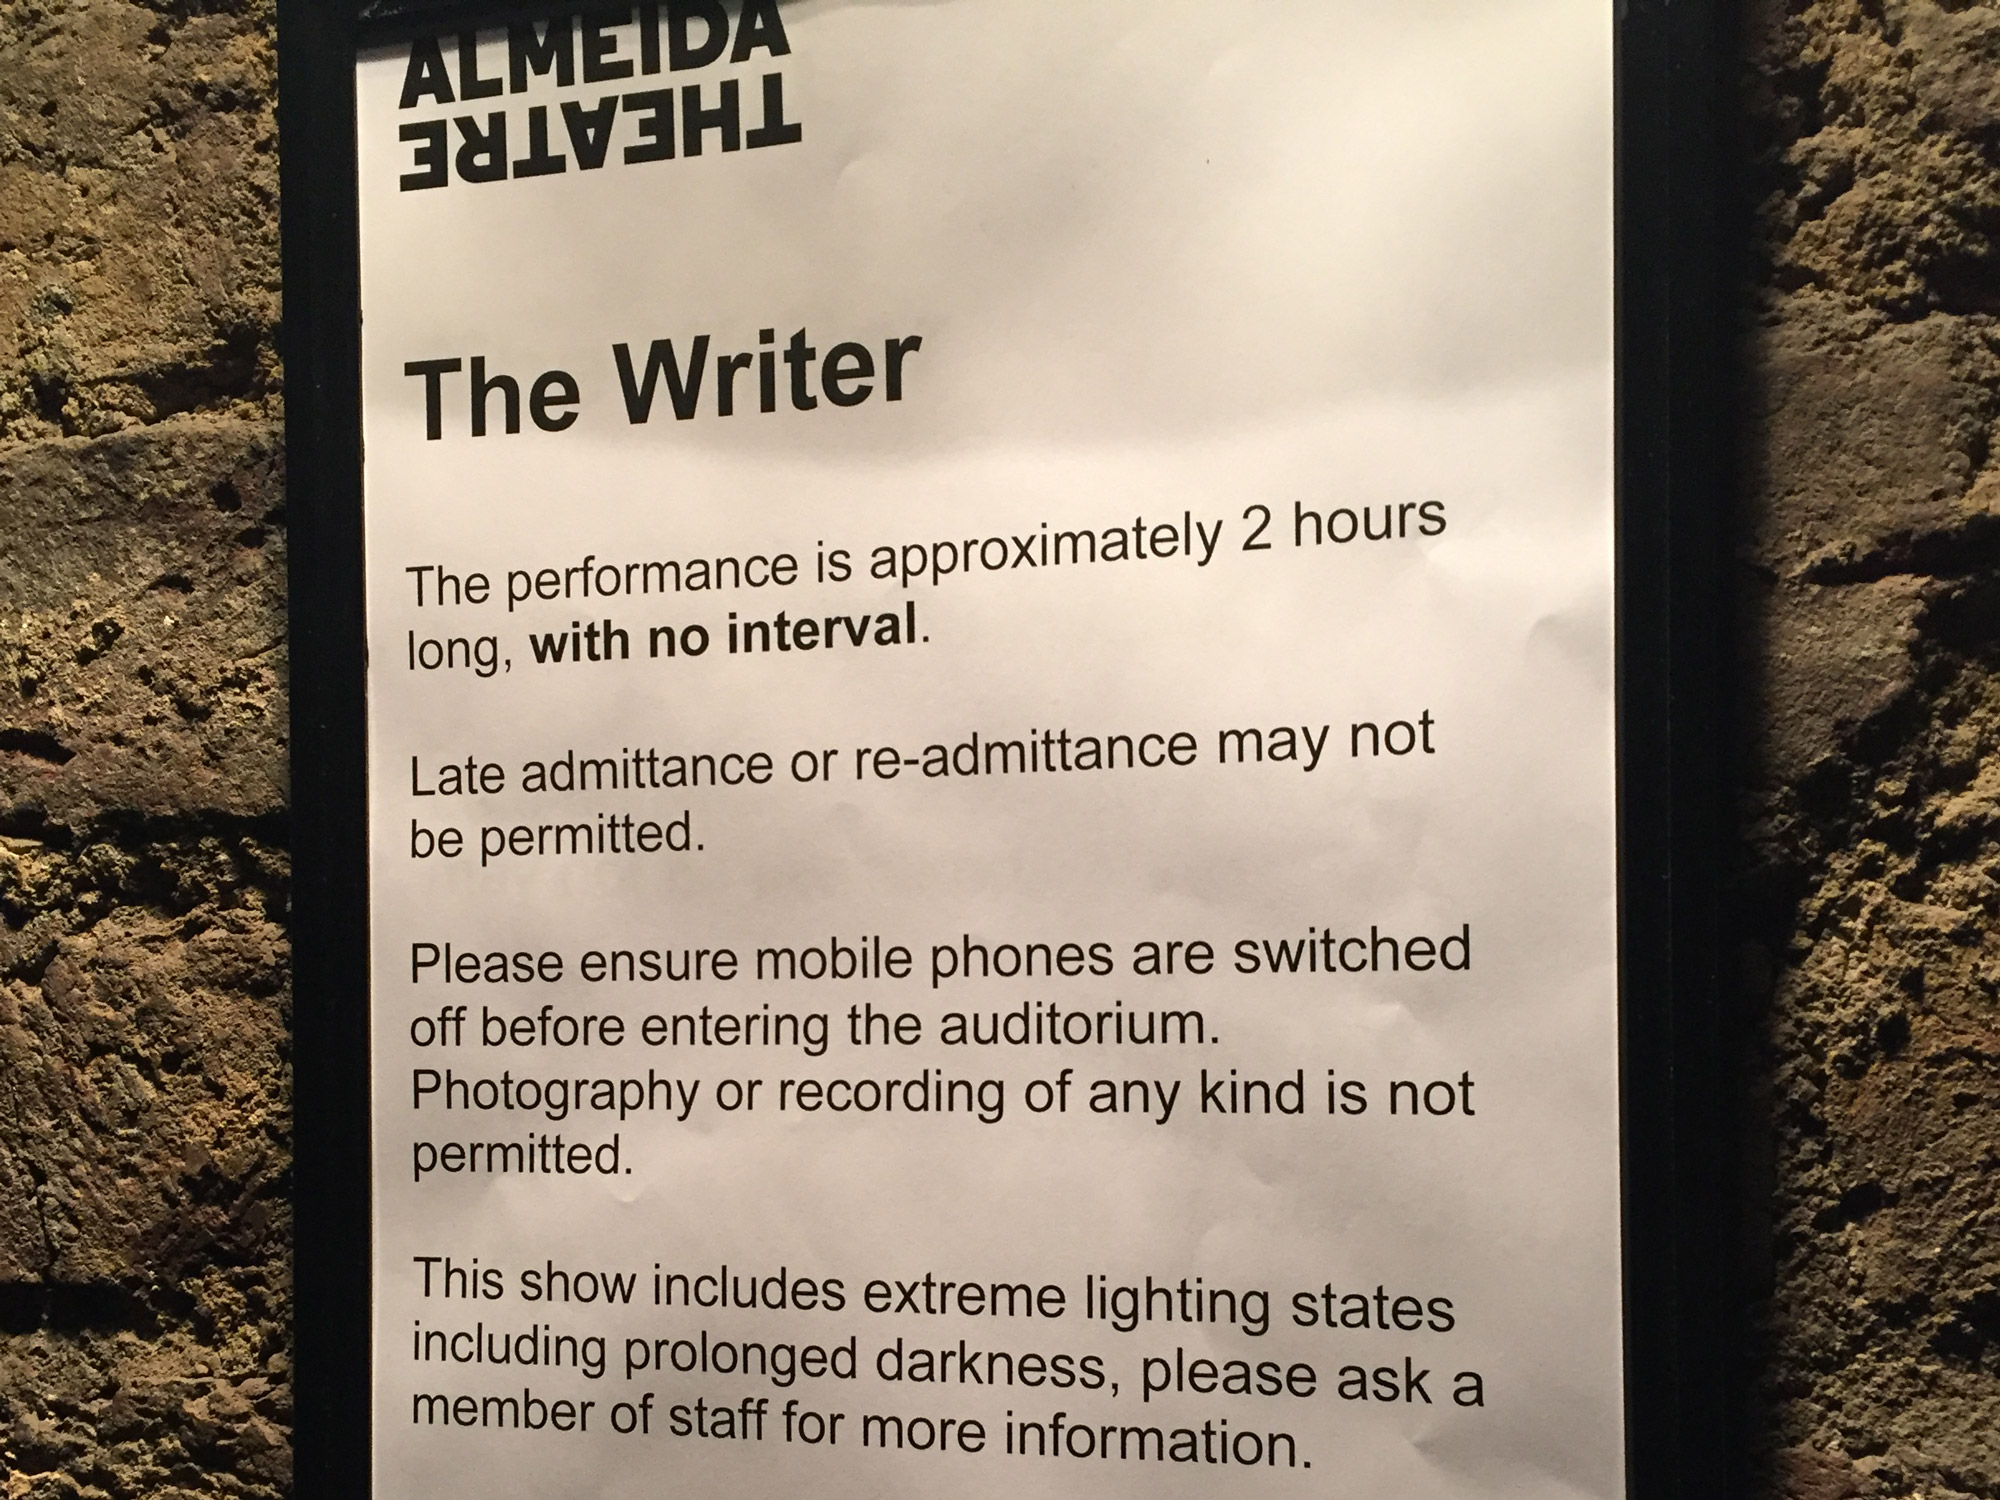 A sign, mounted on a brick wall. The sign read 'The Writer' and has a notifications about the event.